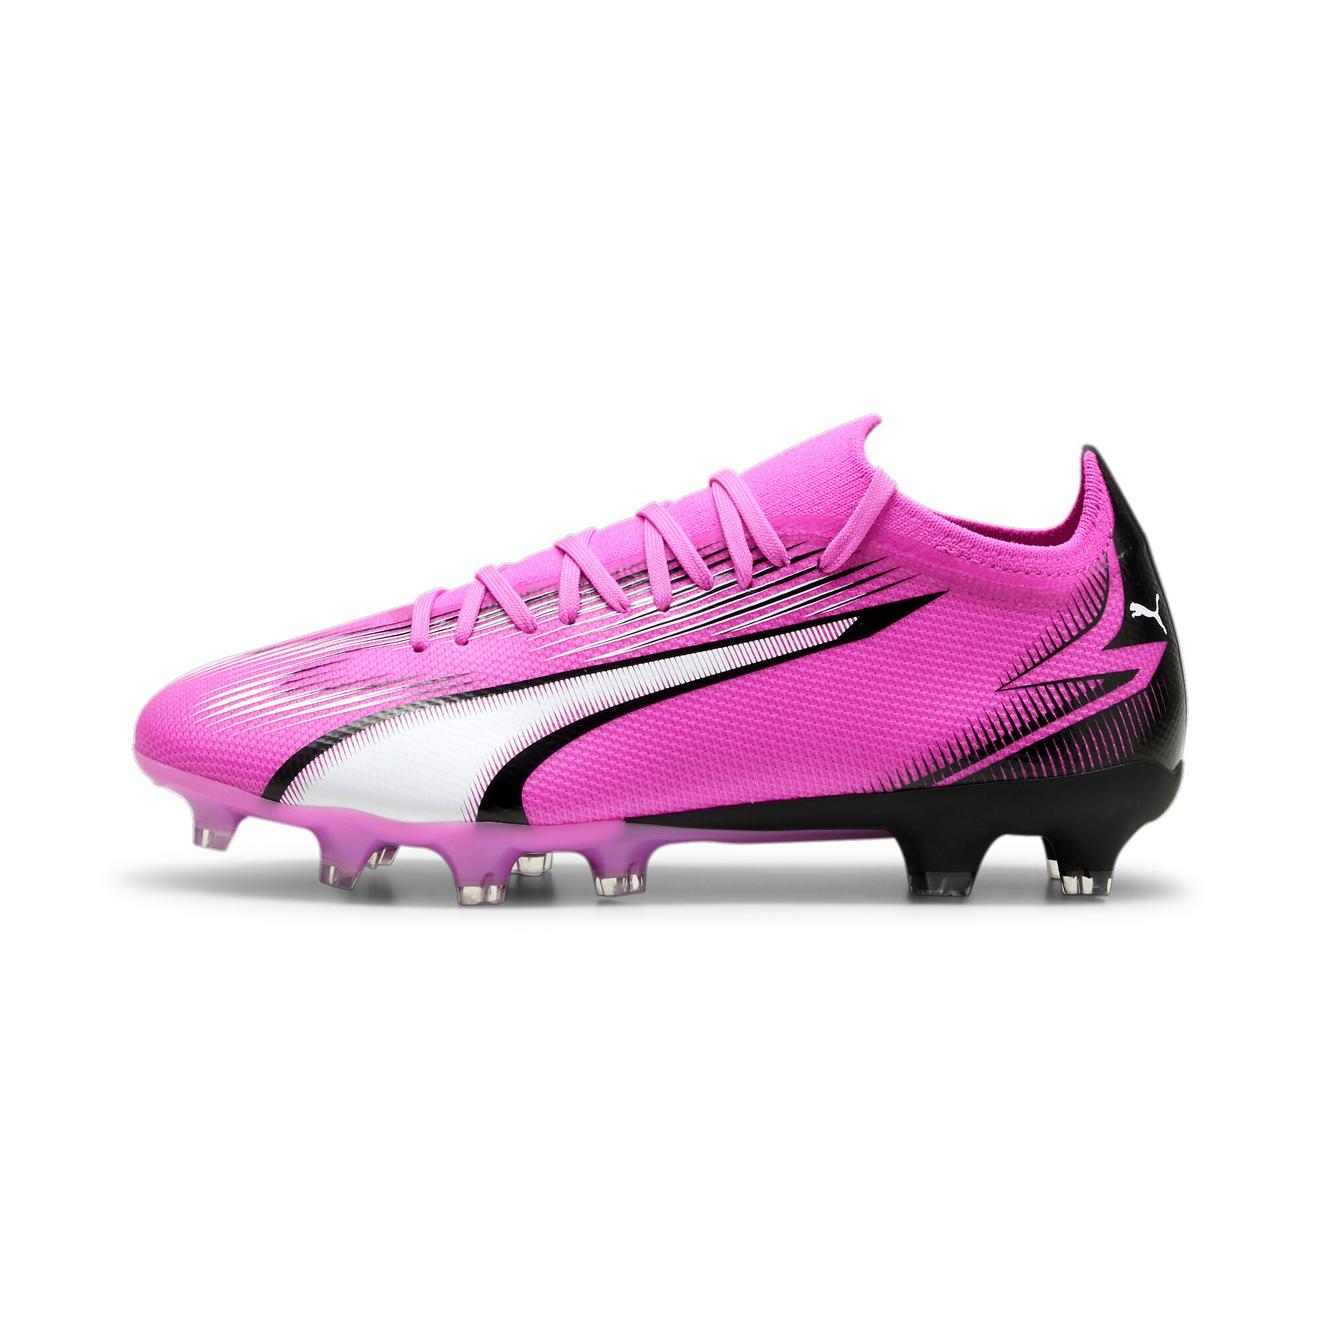 ULTRA MATCH FG/AG Women's Football Boots offers at 279 Dhs in Puma